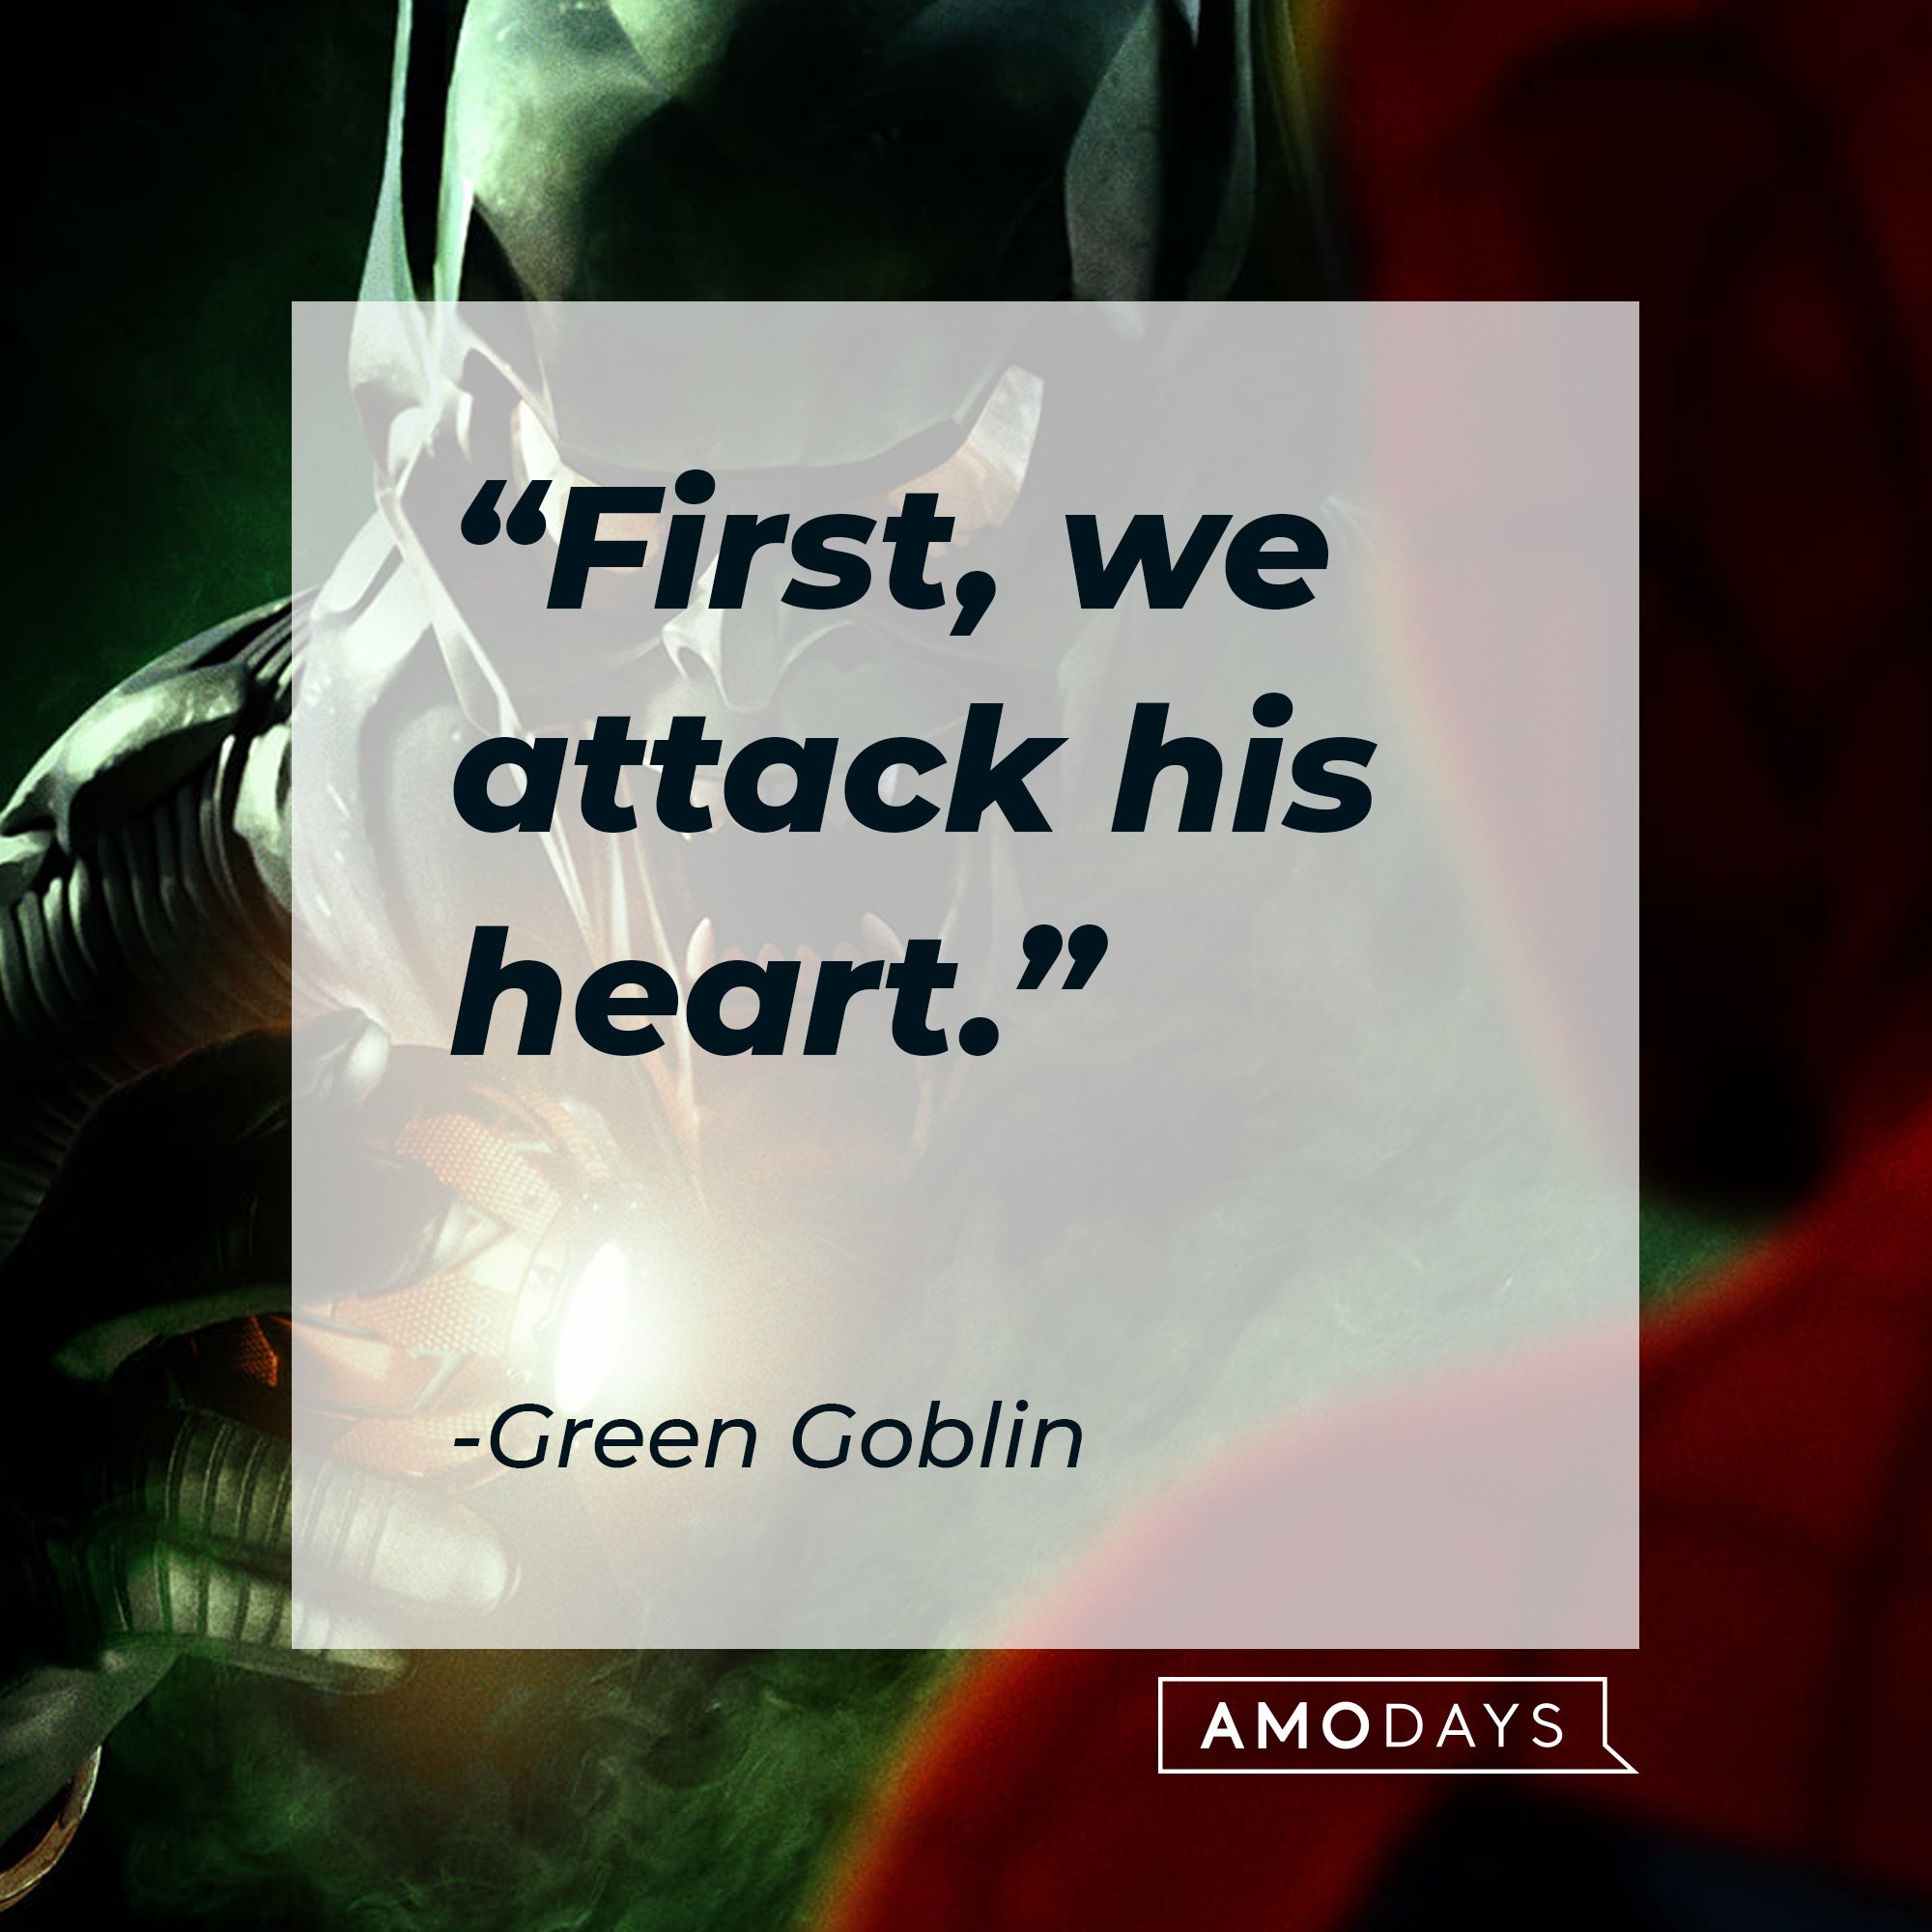 Green Goblin’s quote: "First, we attack his heart." | Image: AmoDays